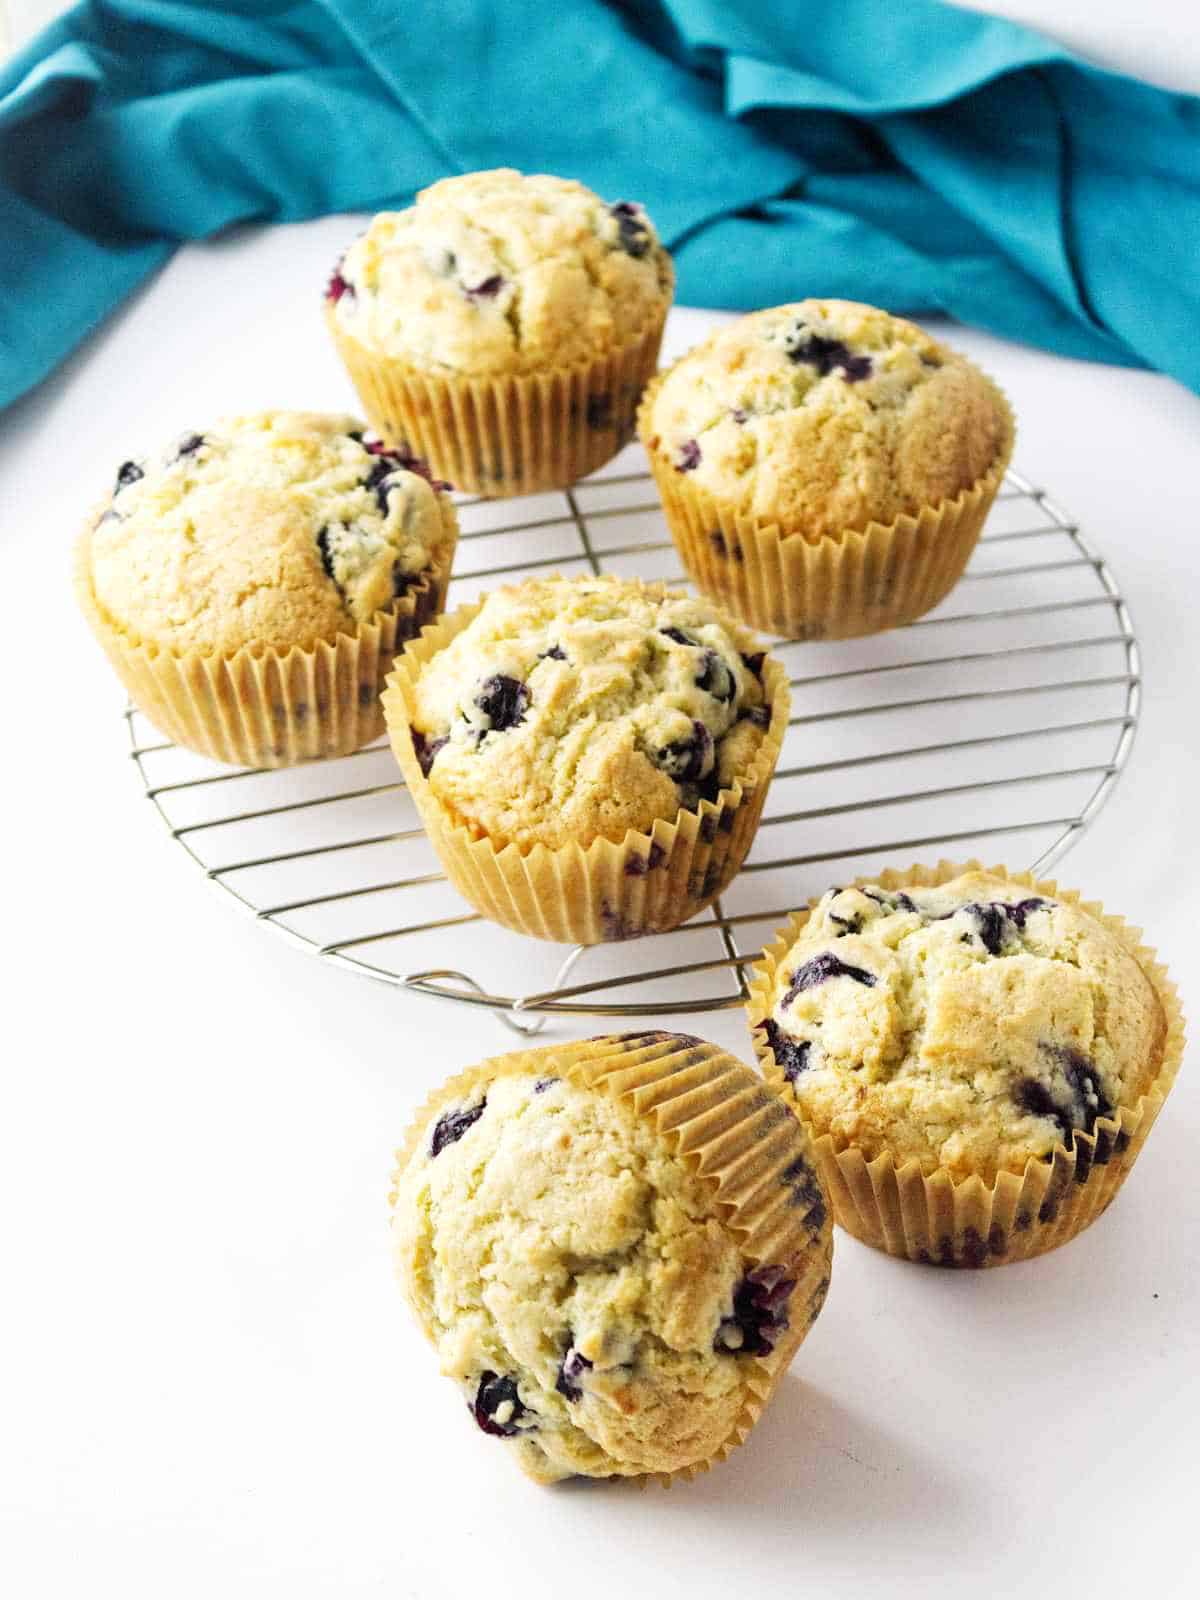 Jumbo blueberry muffins cooling on a rack.